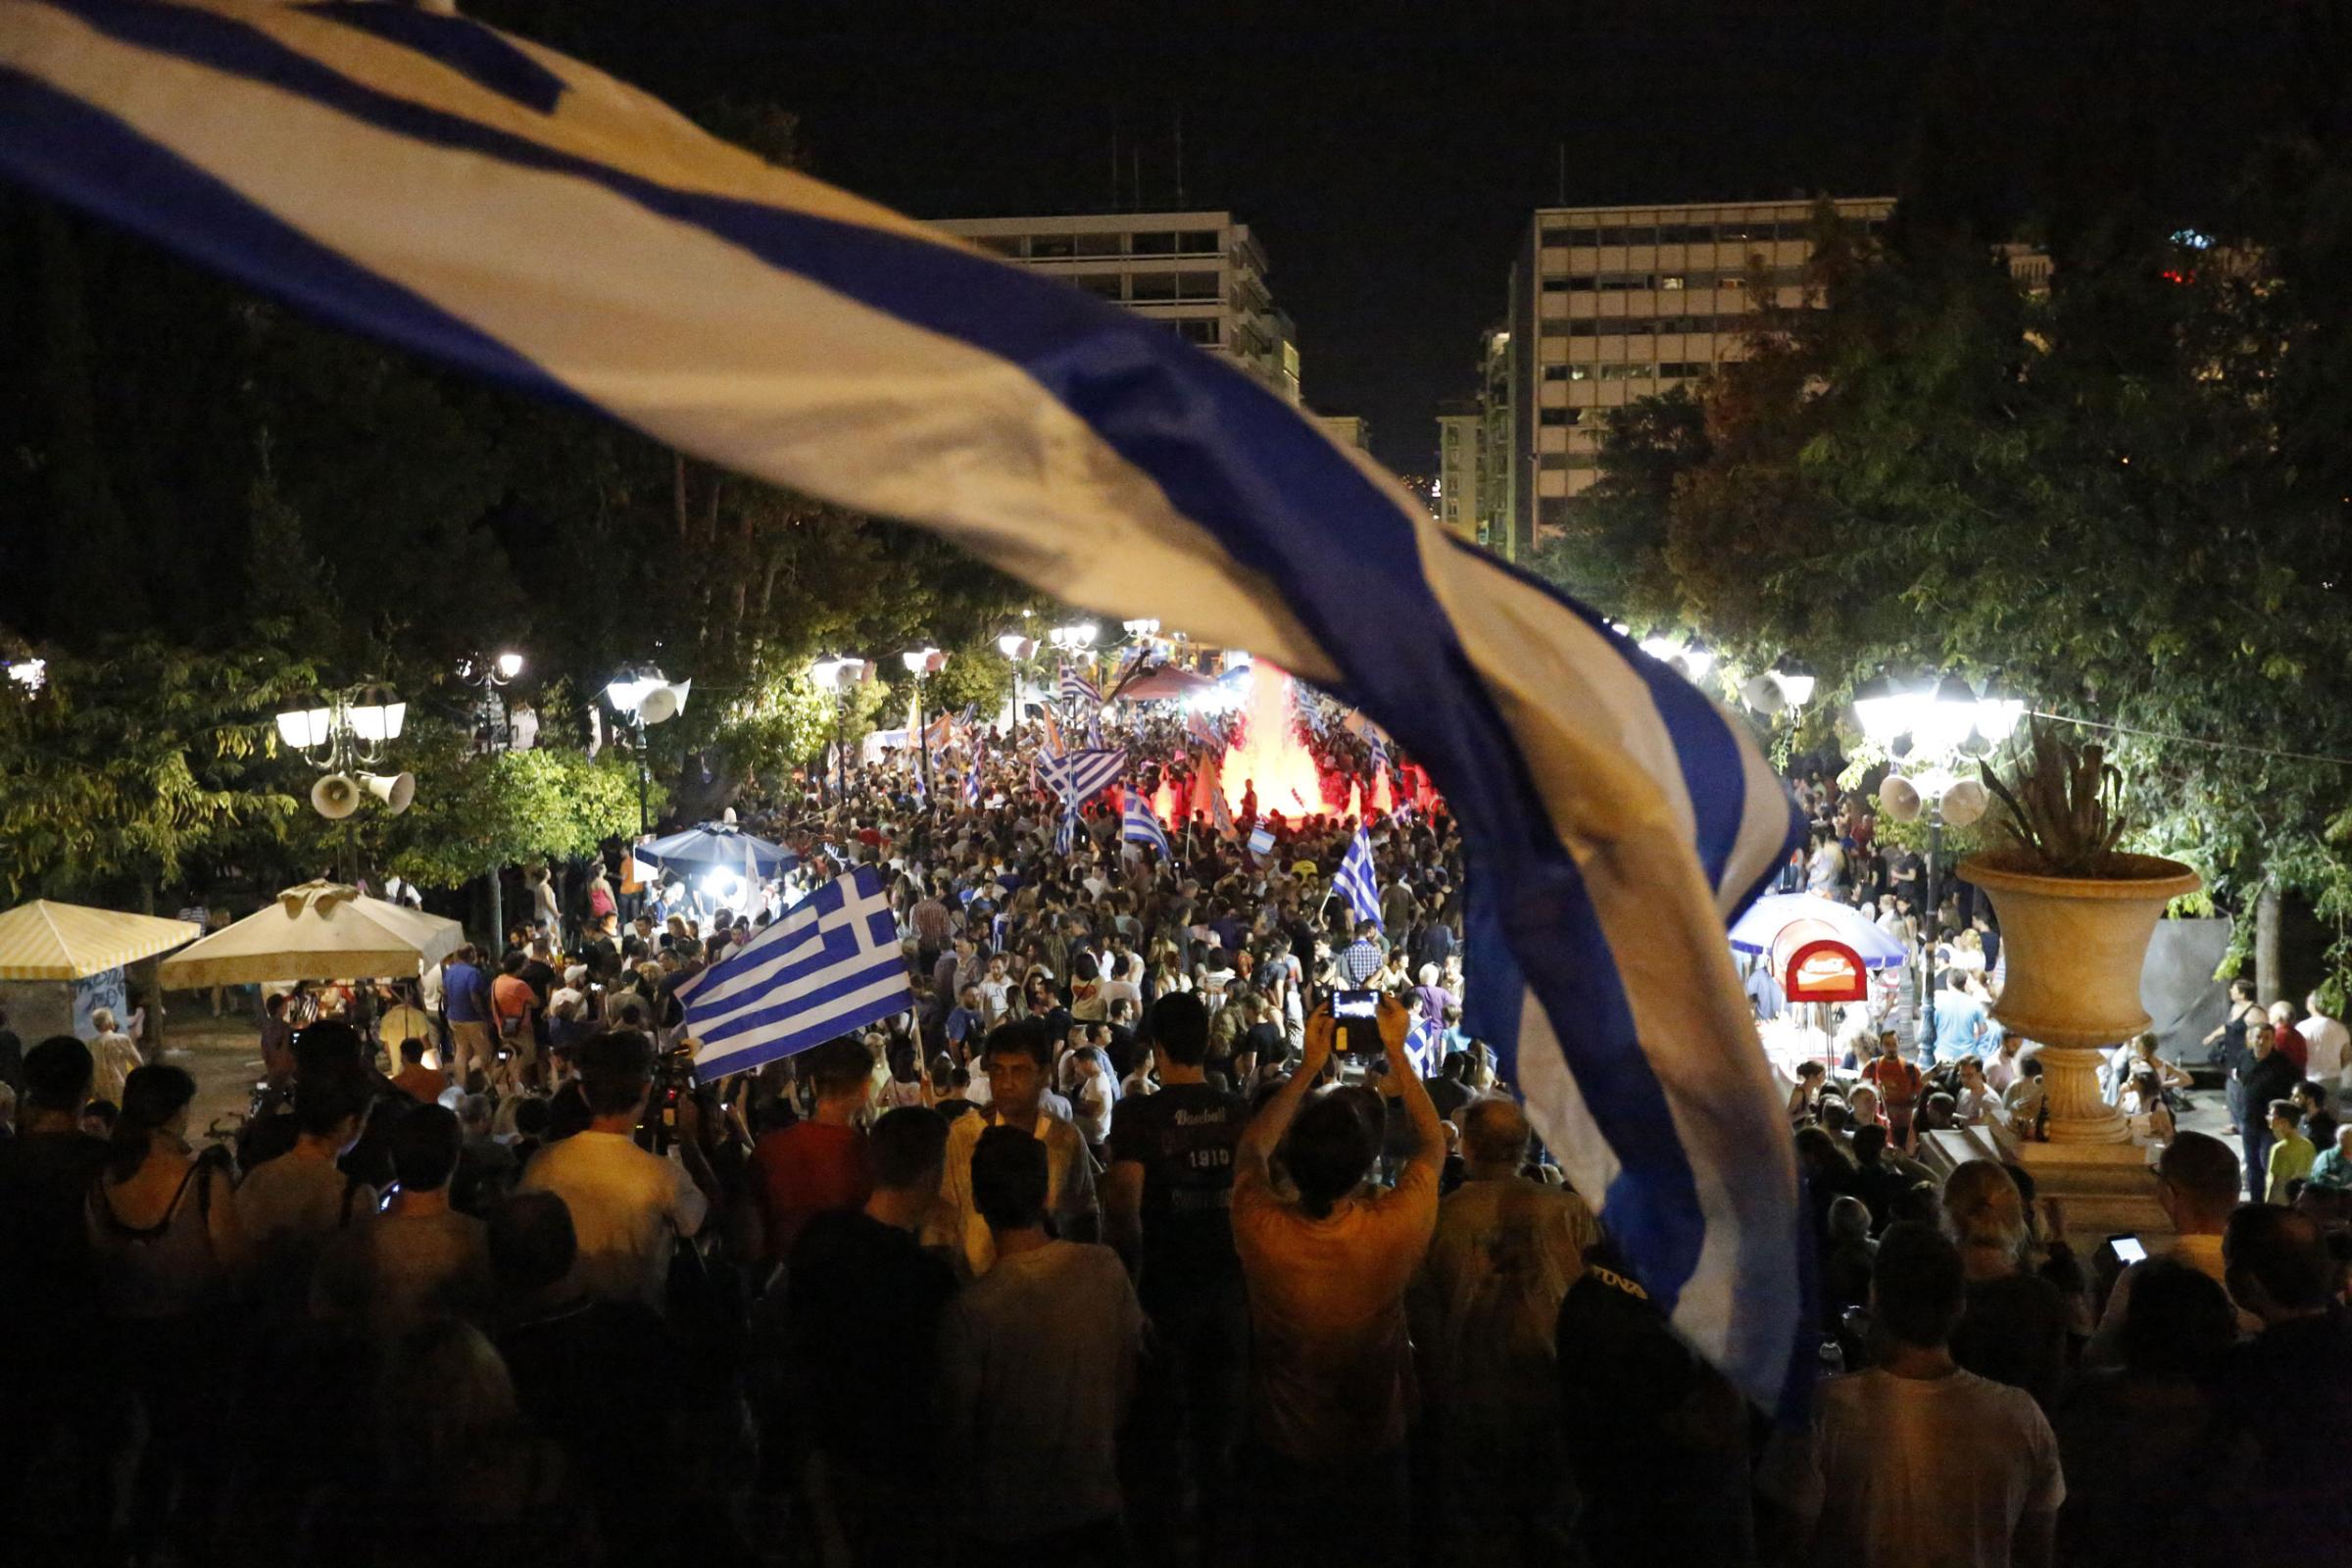 Tens of thousands of Greeks came to the city center of Athens to celebrate the victory of the "No" campaign.